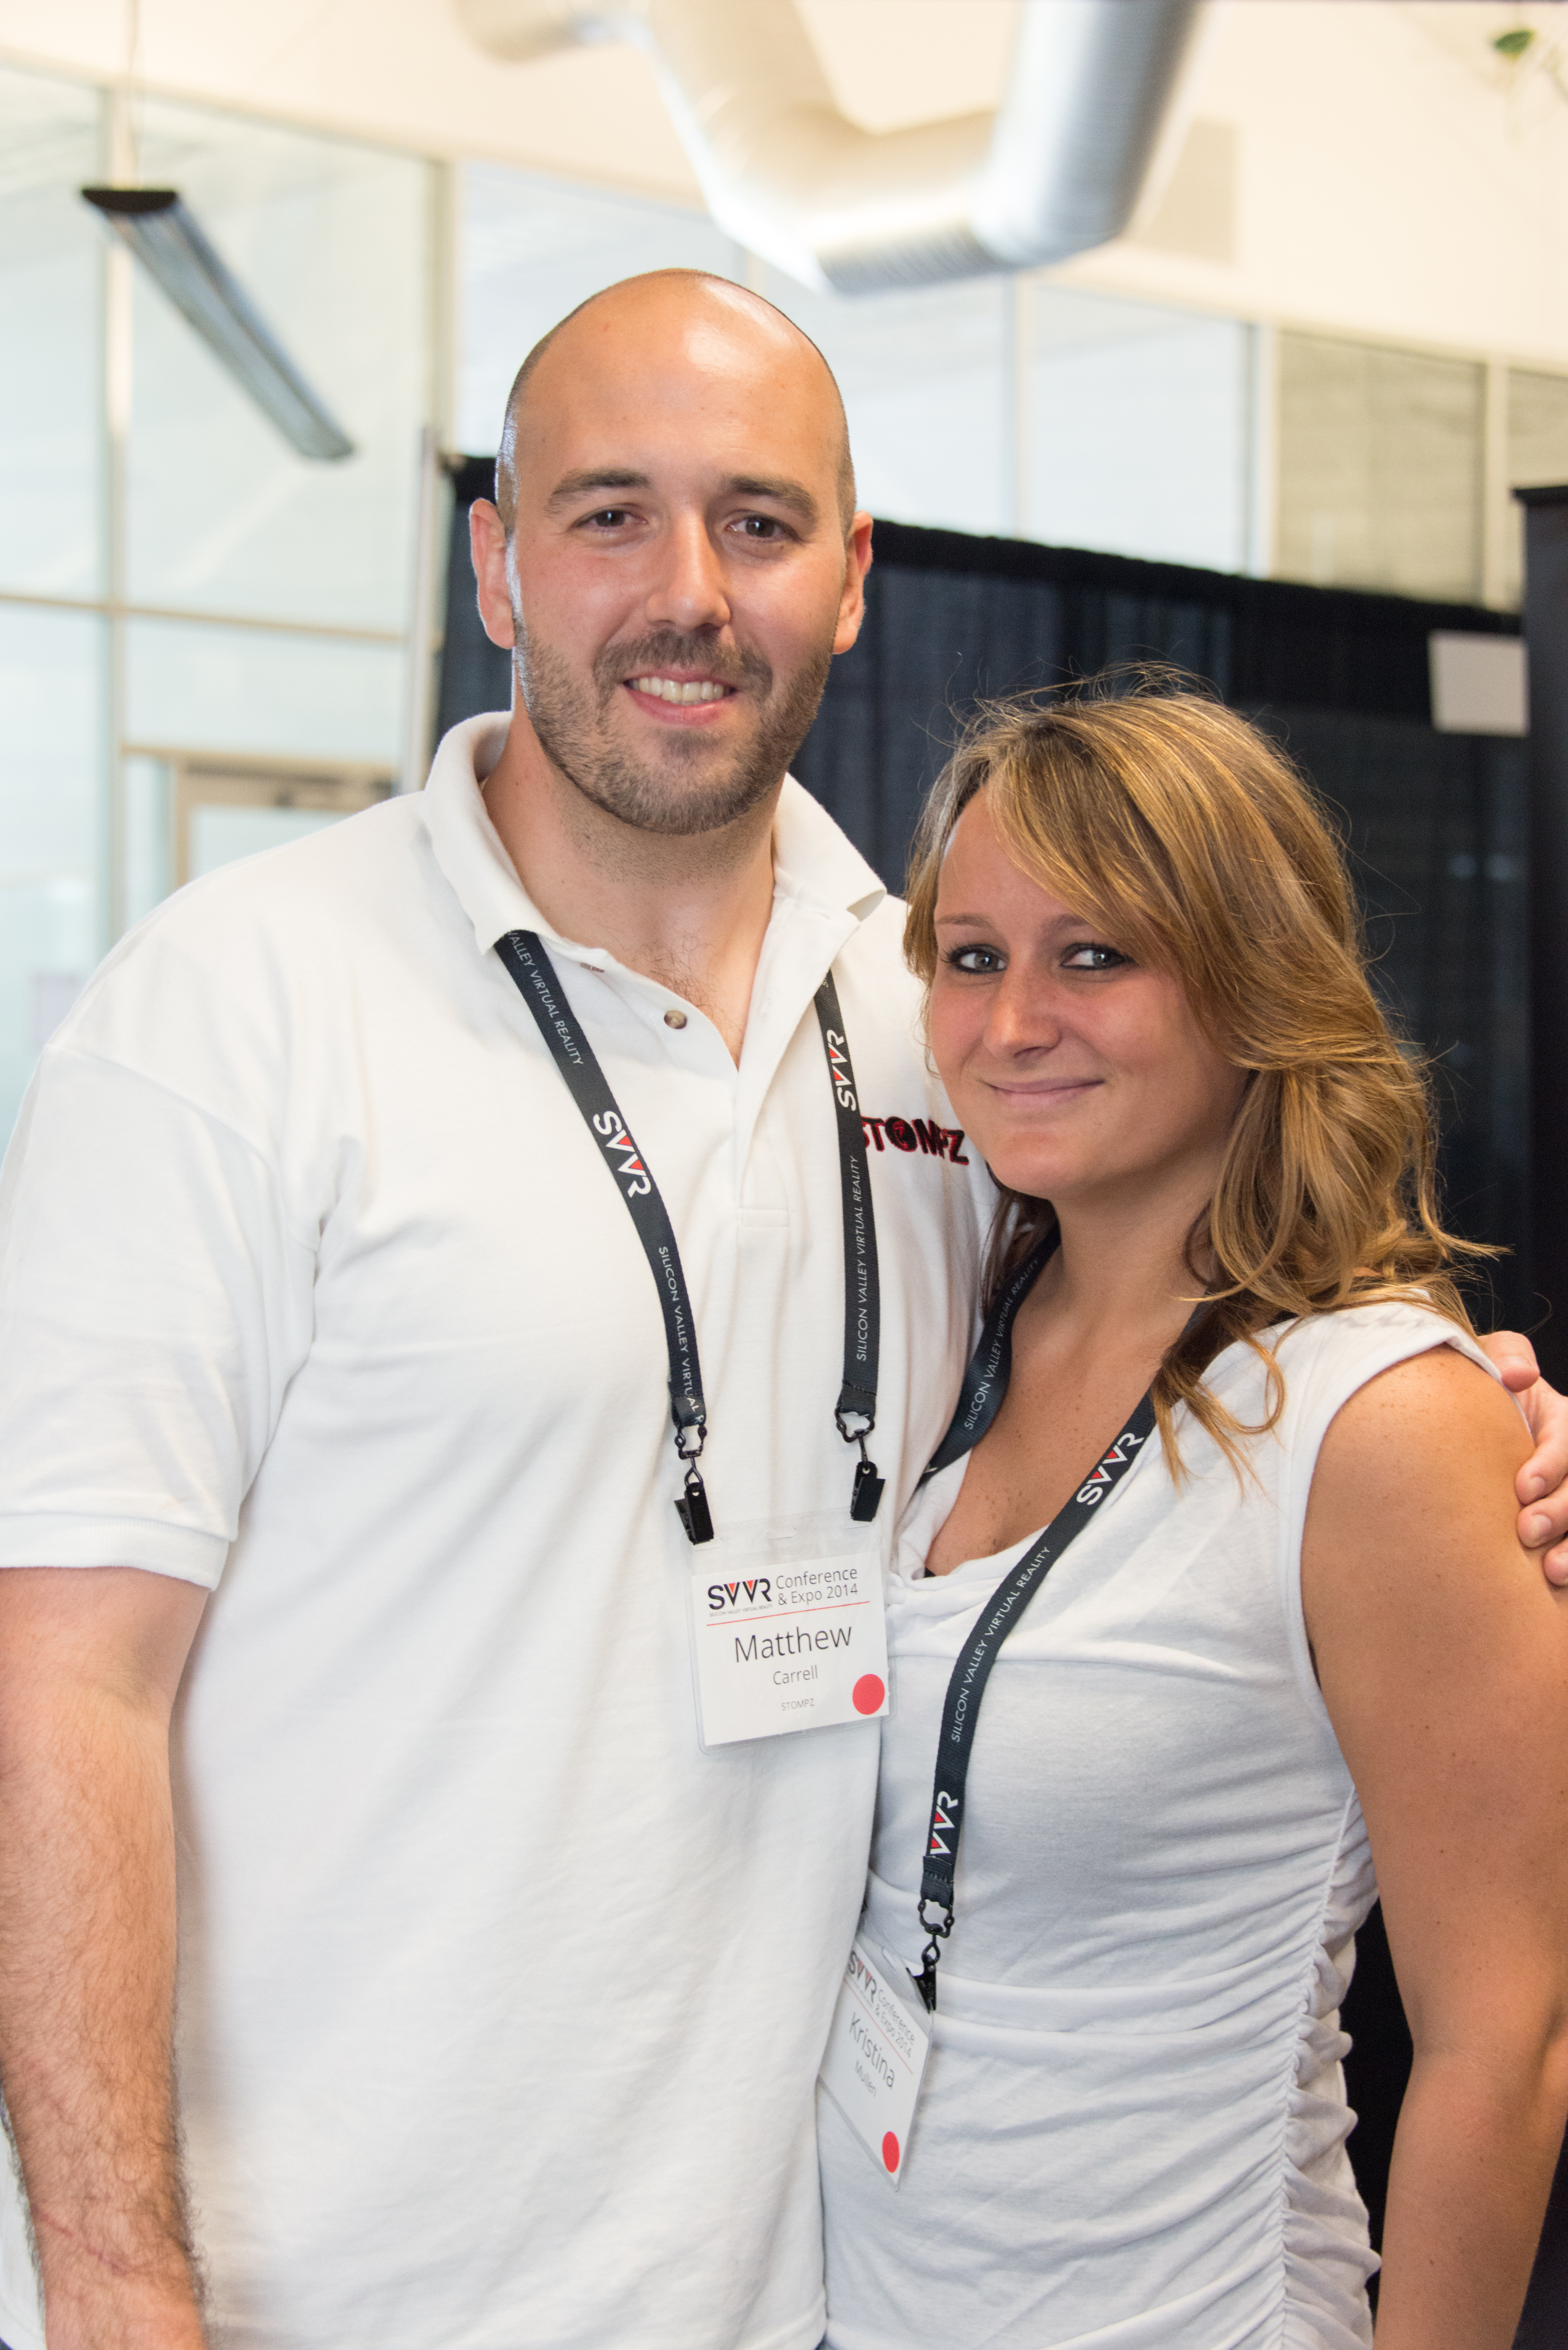 Posed portrait of matthew carrell of stompz and girlfriend kristina mullen at svvr expo (full upper bodies) photo